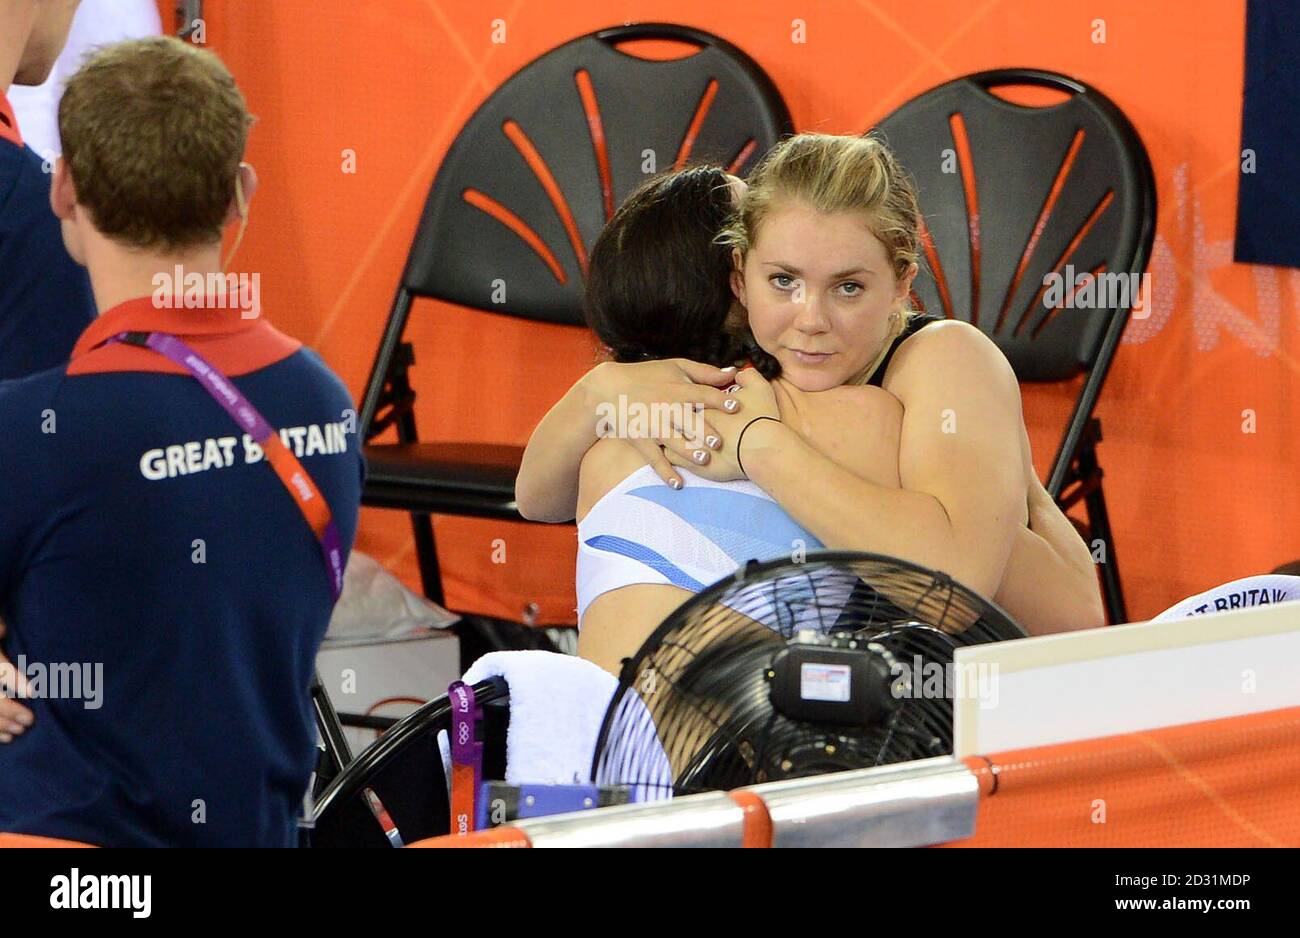 Great Britain's Jess Varnish hugs Victoria Pendleton after they were relegated from the team sprint first round on the first day of the track cycling at the Velodrome in the Olympic Park. Stock Photo